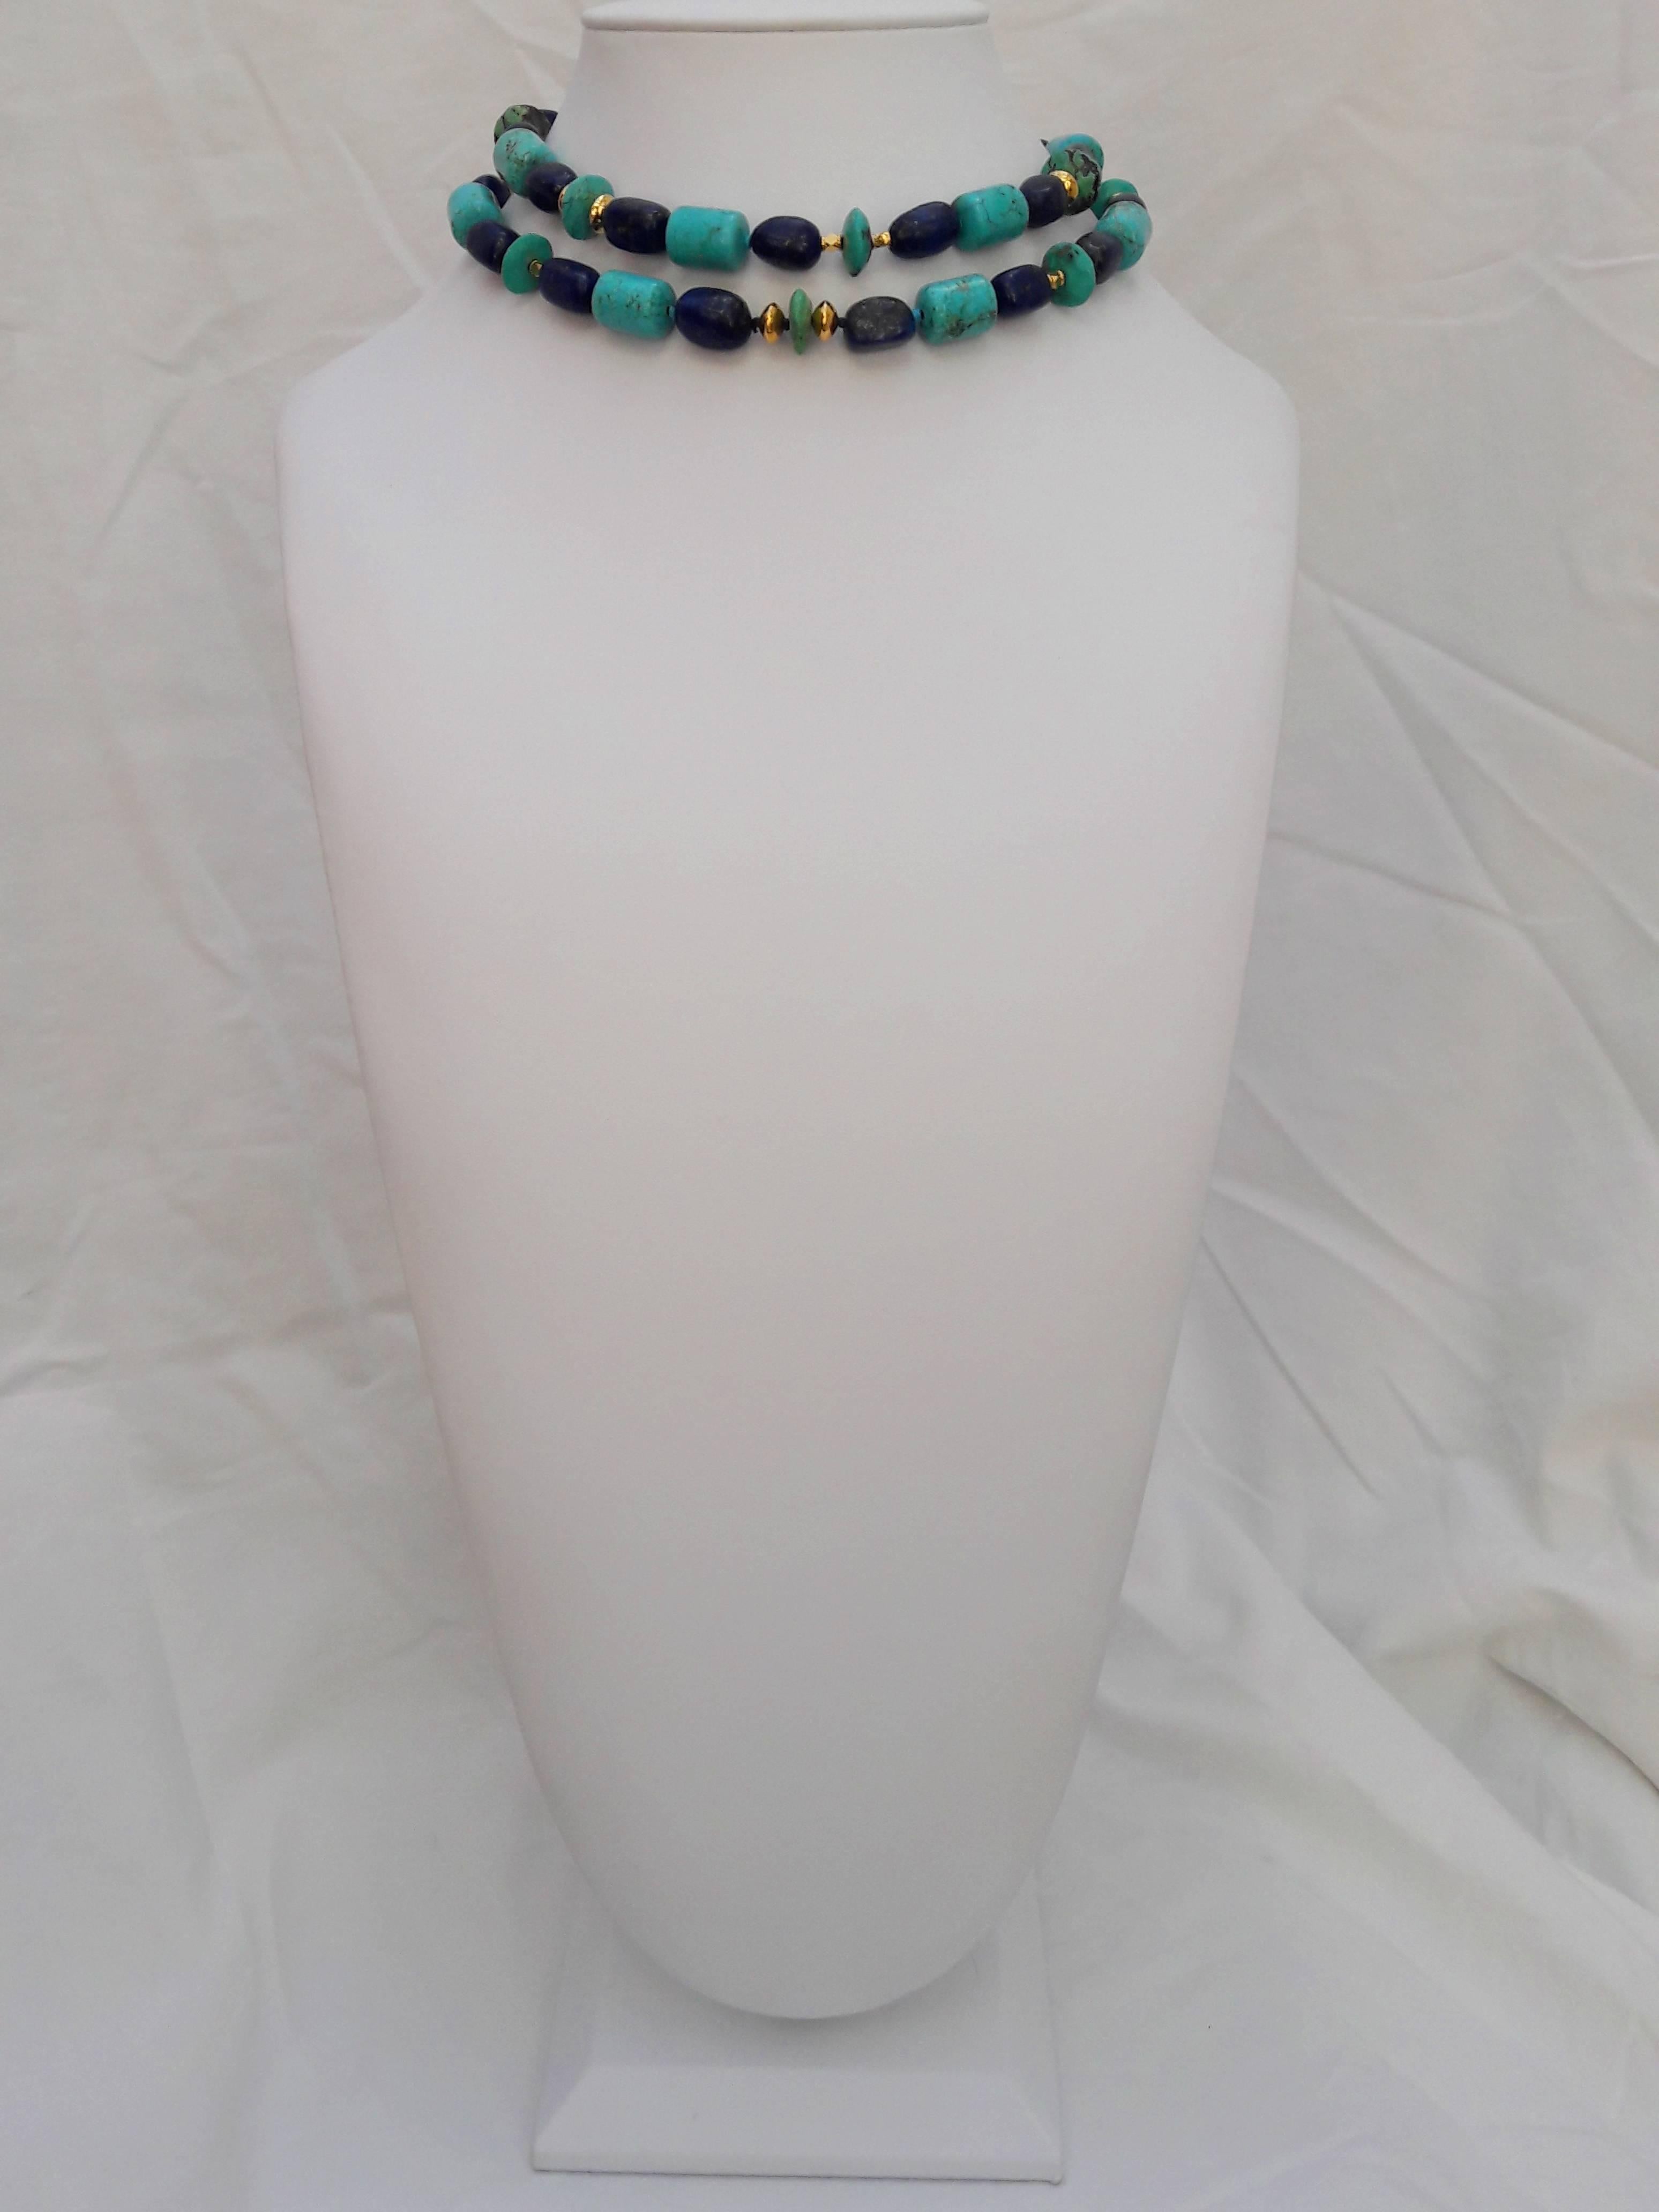 Odd and asymmetrical beads of turquoise and lapis are composed in a matched pattern of color and dimension. Sections of dark and light blue are punctuated with silver (gold-plated) beads that accentuate the contrast of the beads. This long lariat